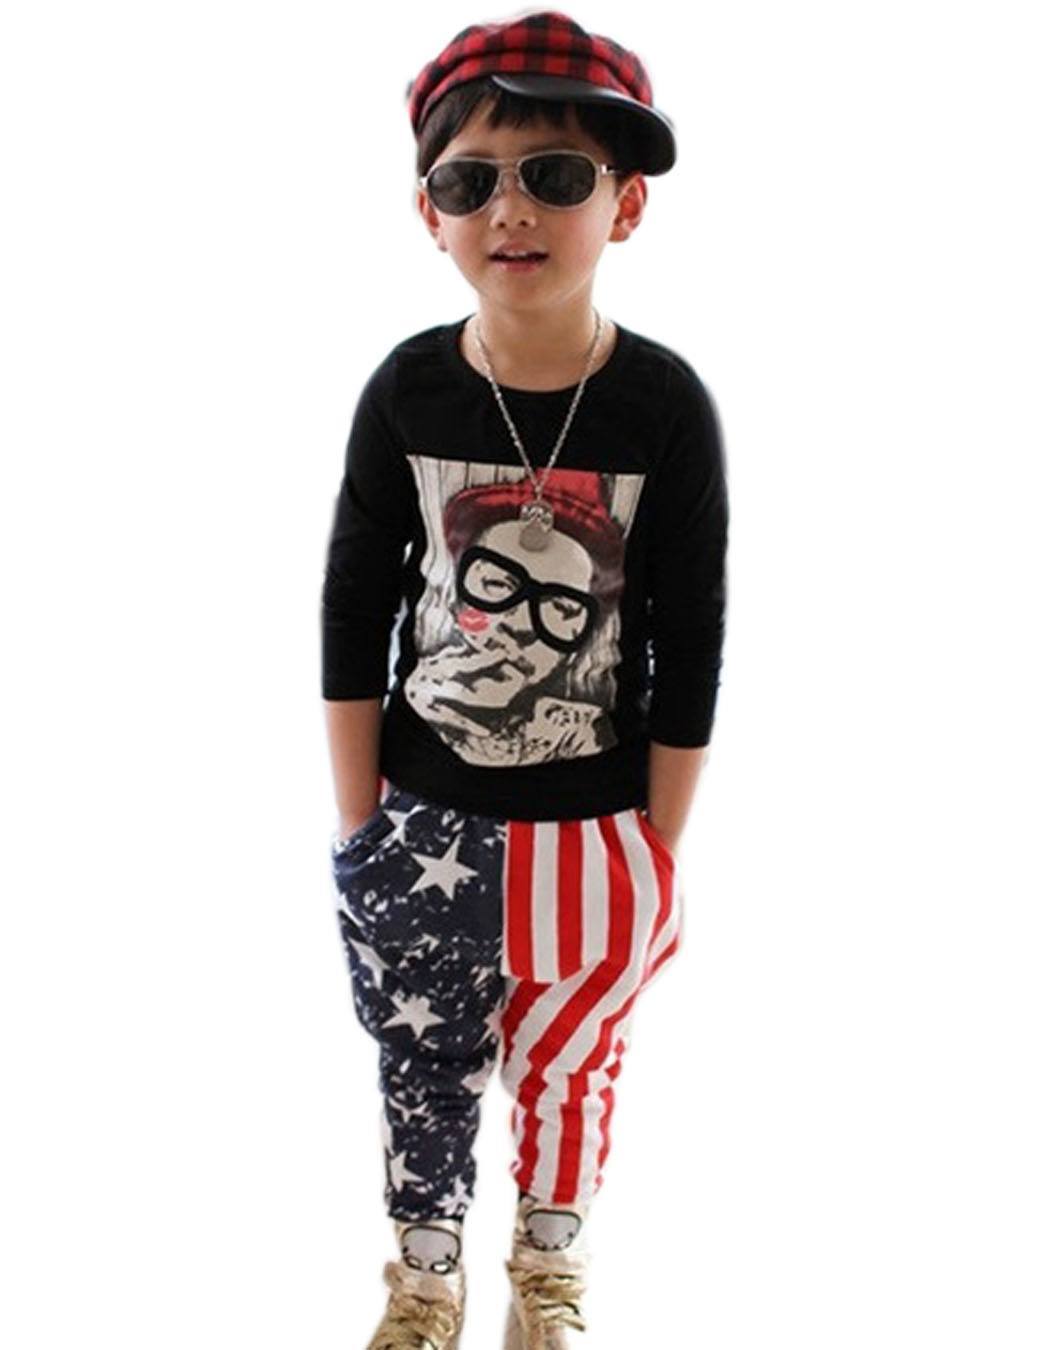 Kids 4th of July Outfits - 19 Ways To Dress Kids On 4th July